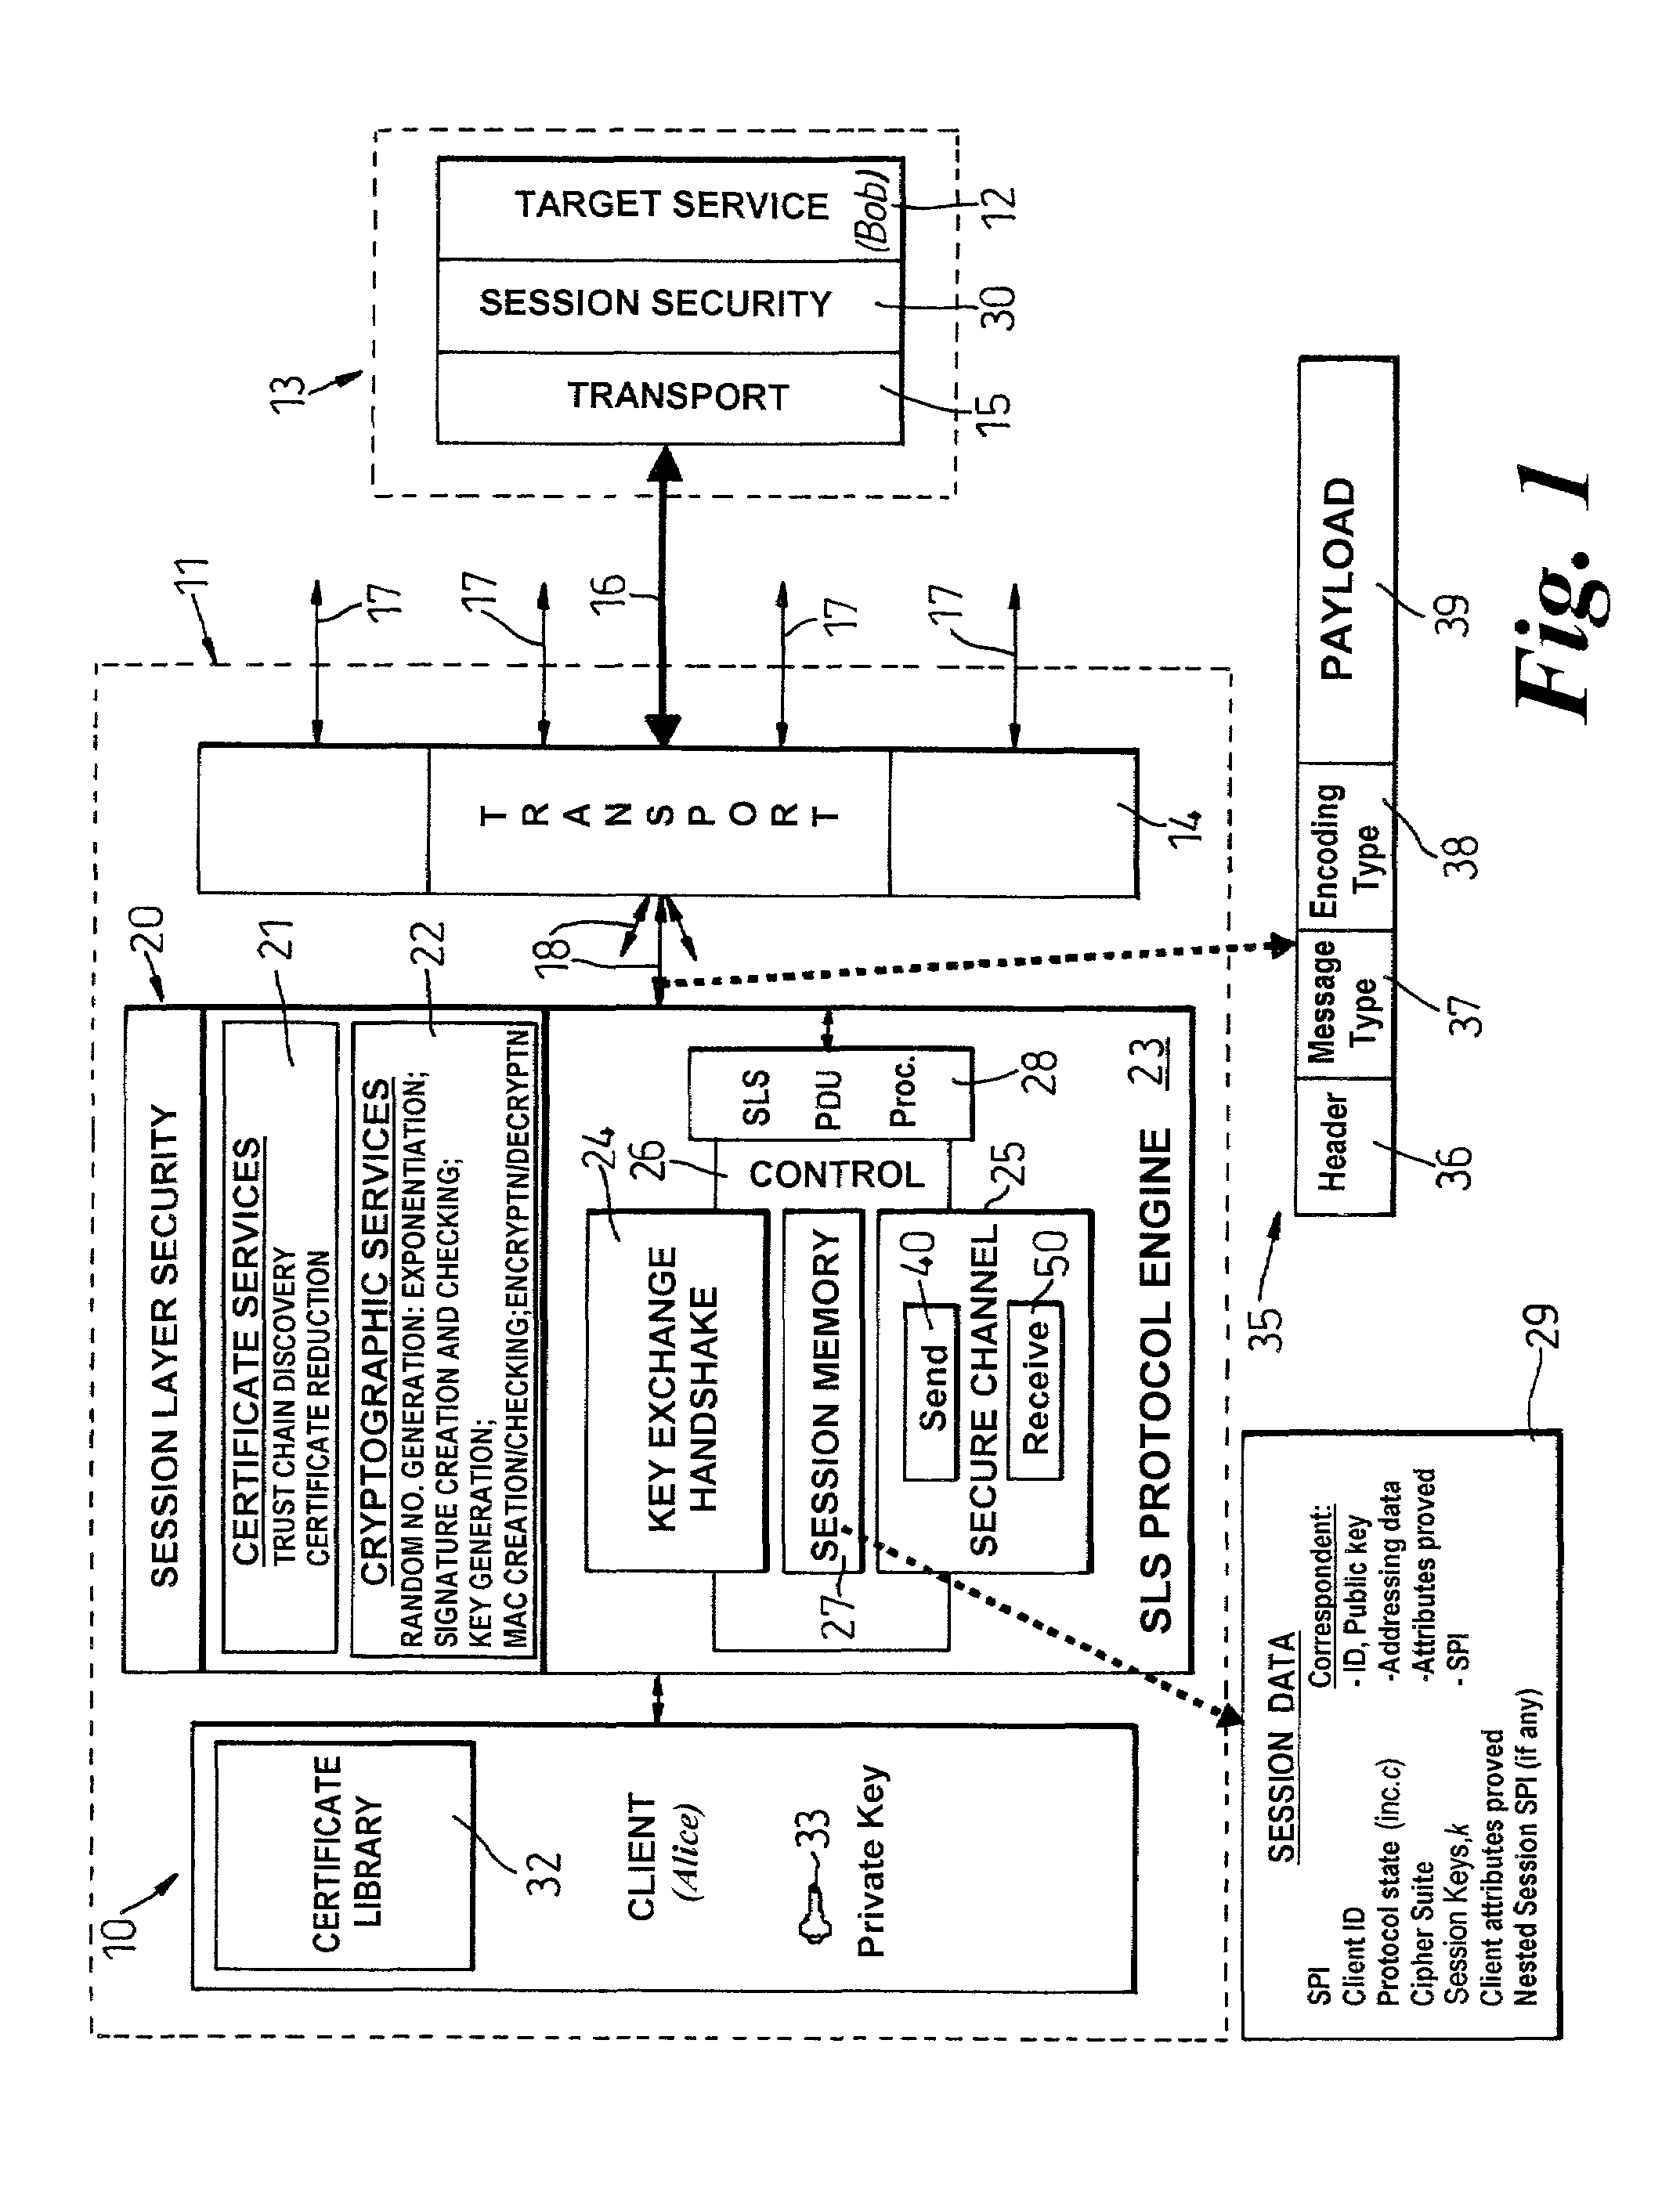 Method and apparatus for a secure communications session with a remote system via an access-controlling intermediate system